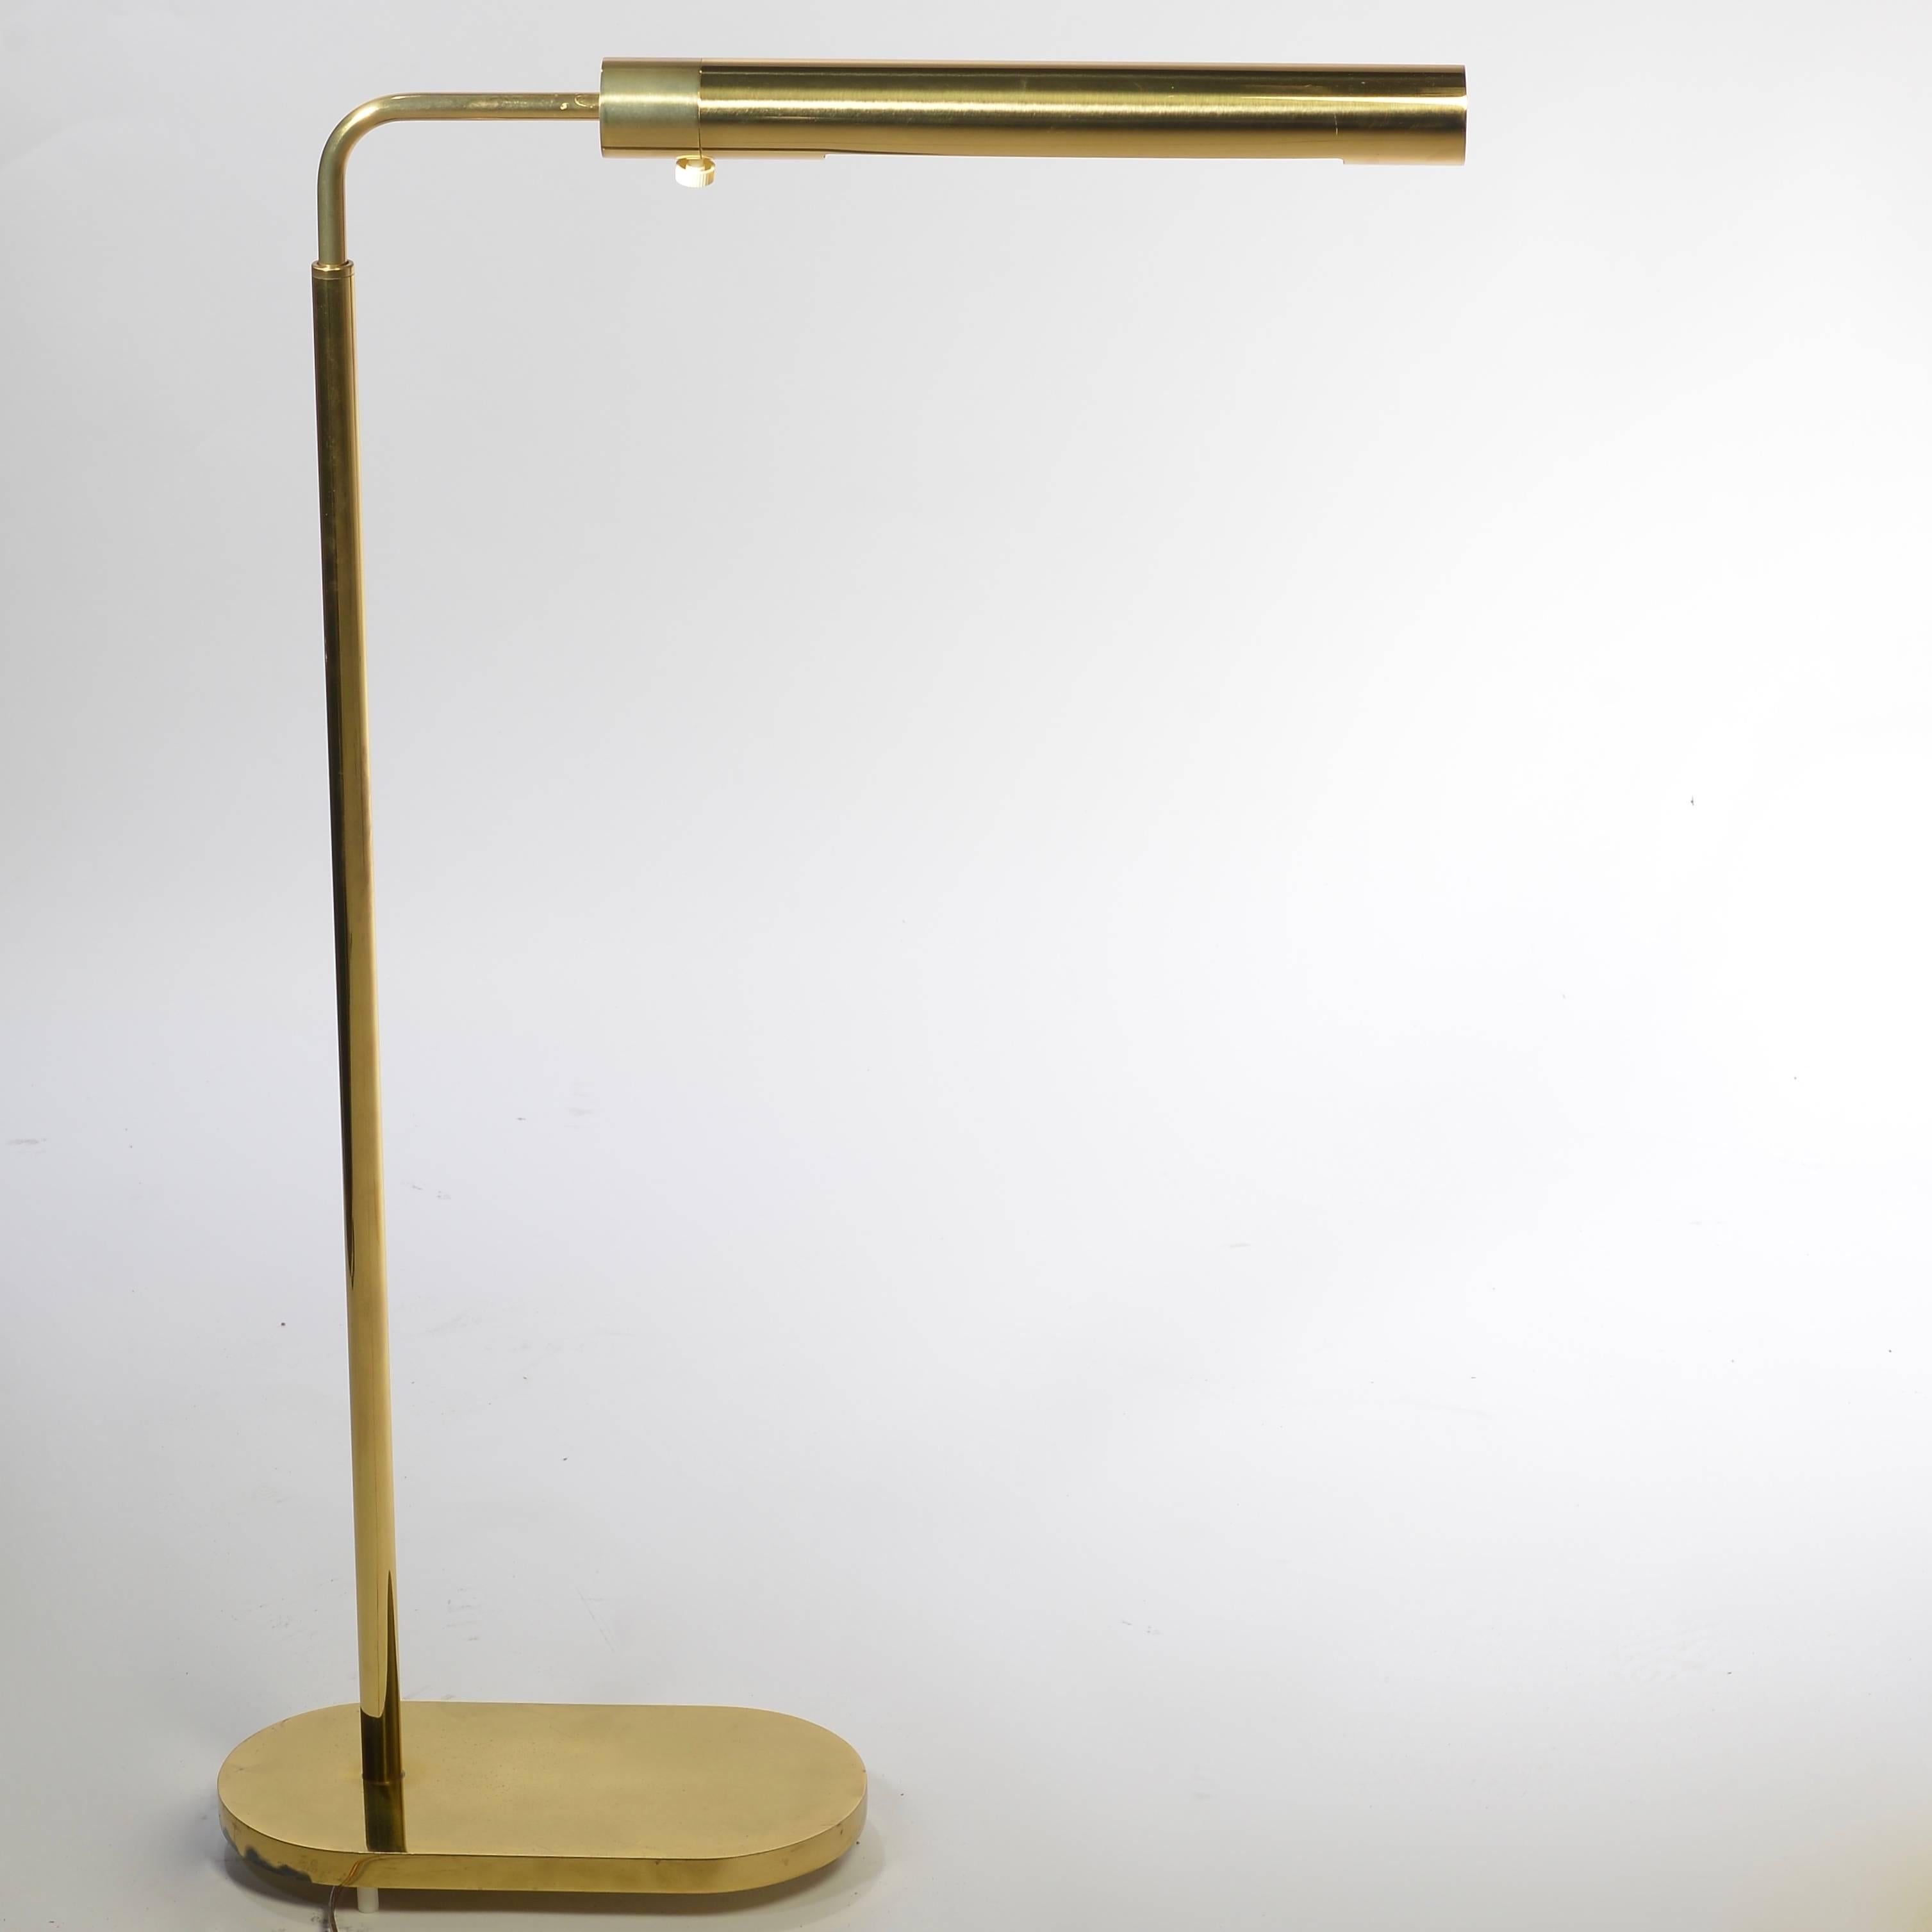 Long cylinder brass swivel floor lamp by Casella, 1980s manufactured in San Francisco. The fixture is in  excellent vintage condition.